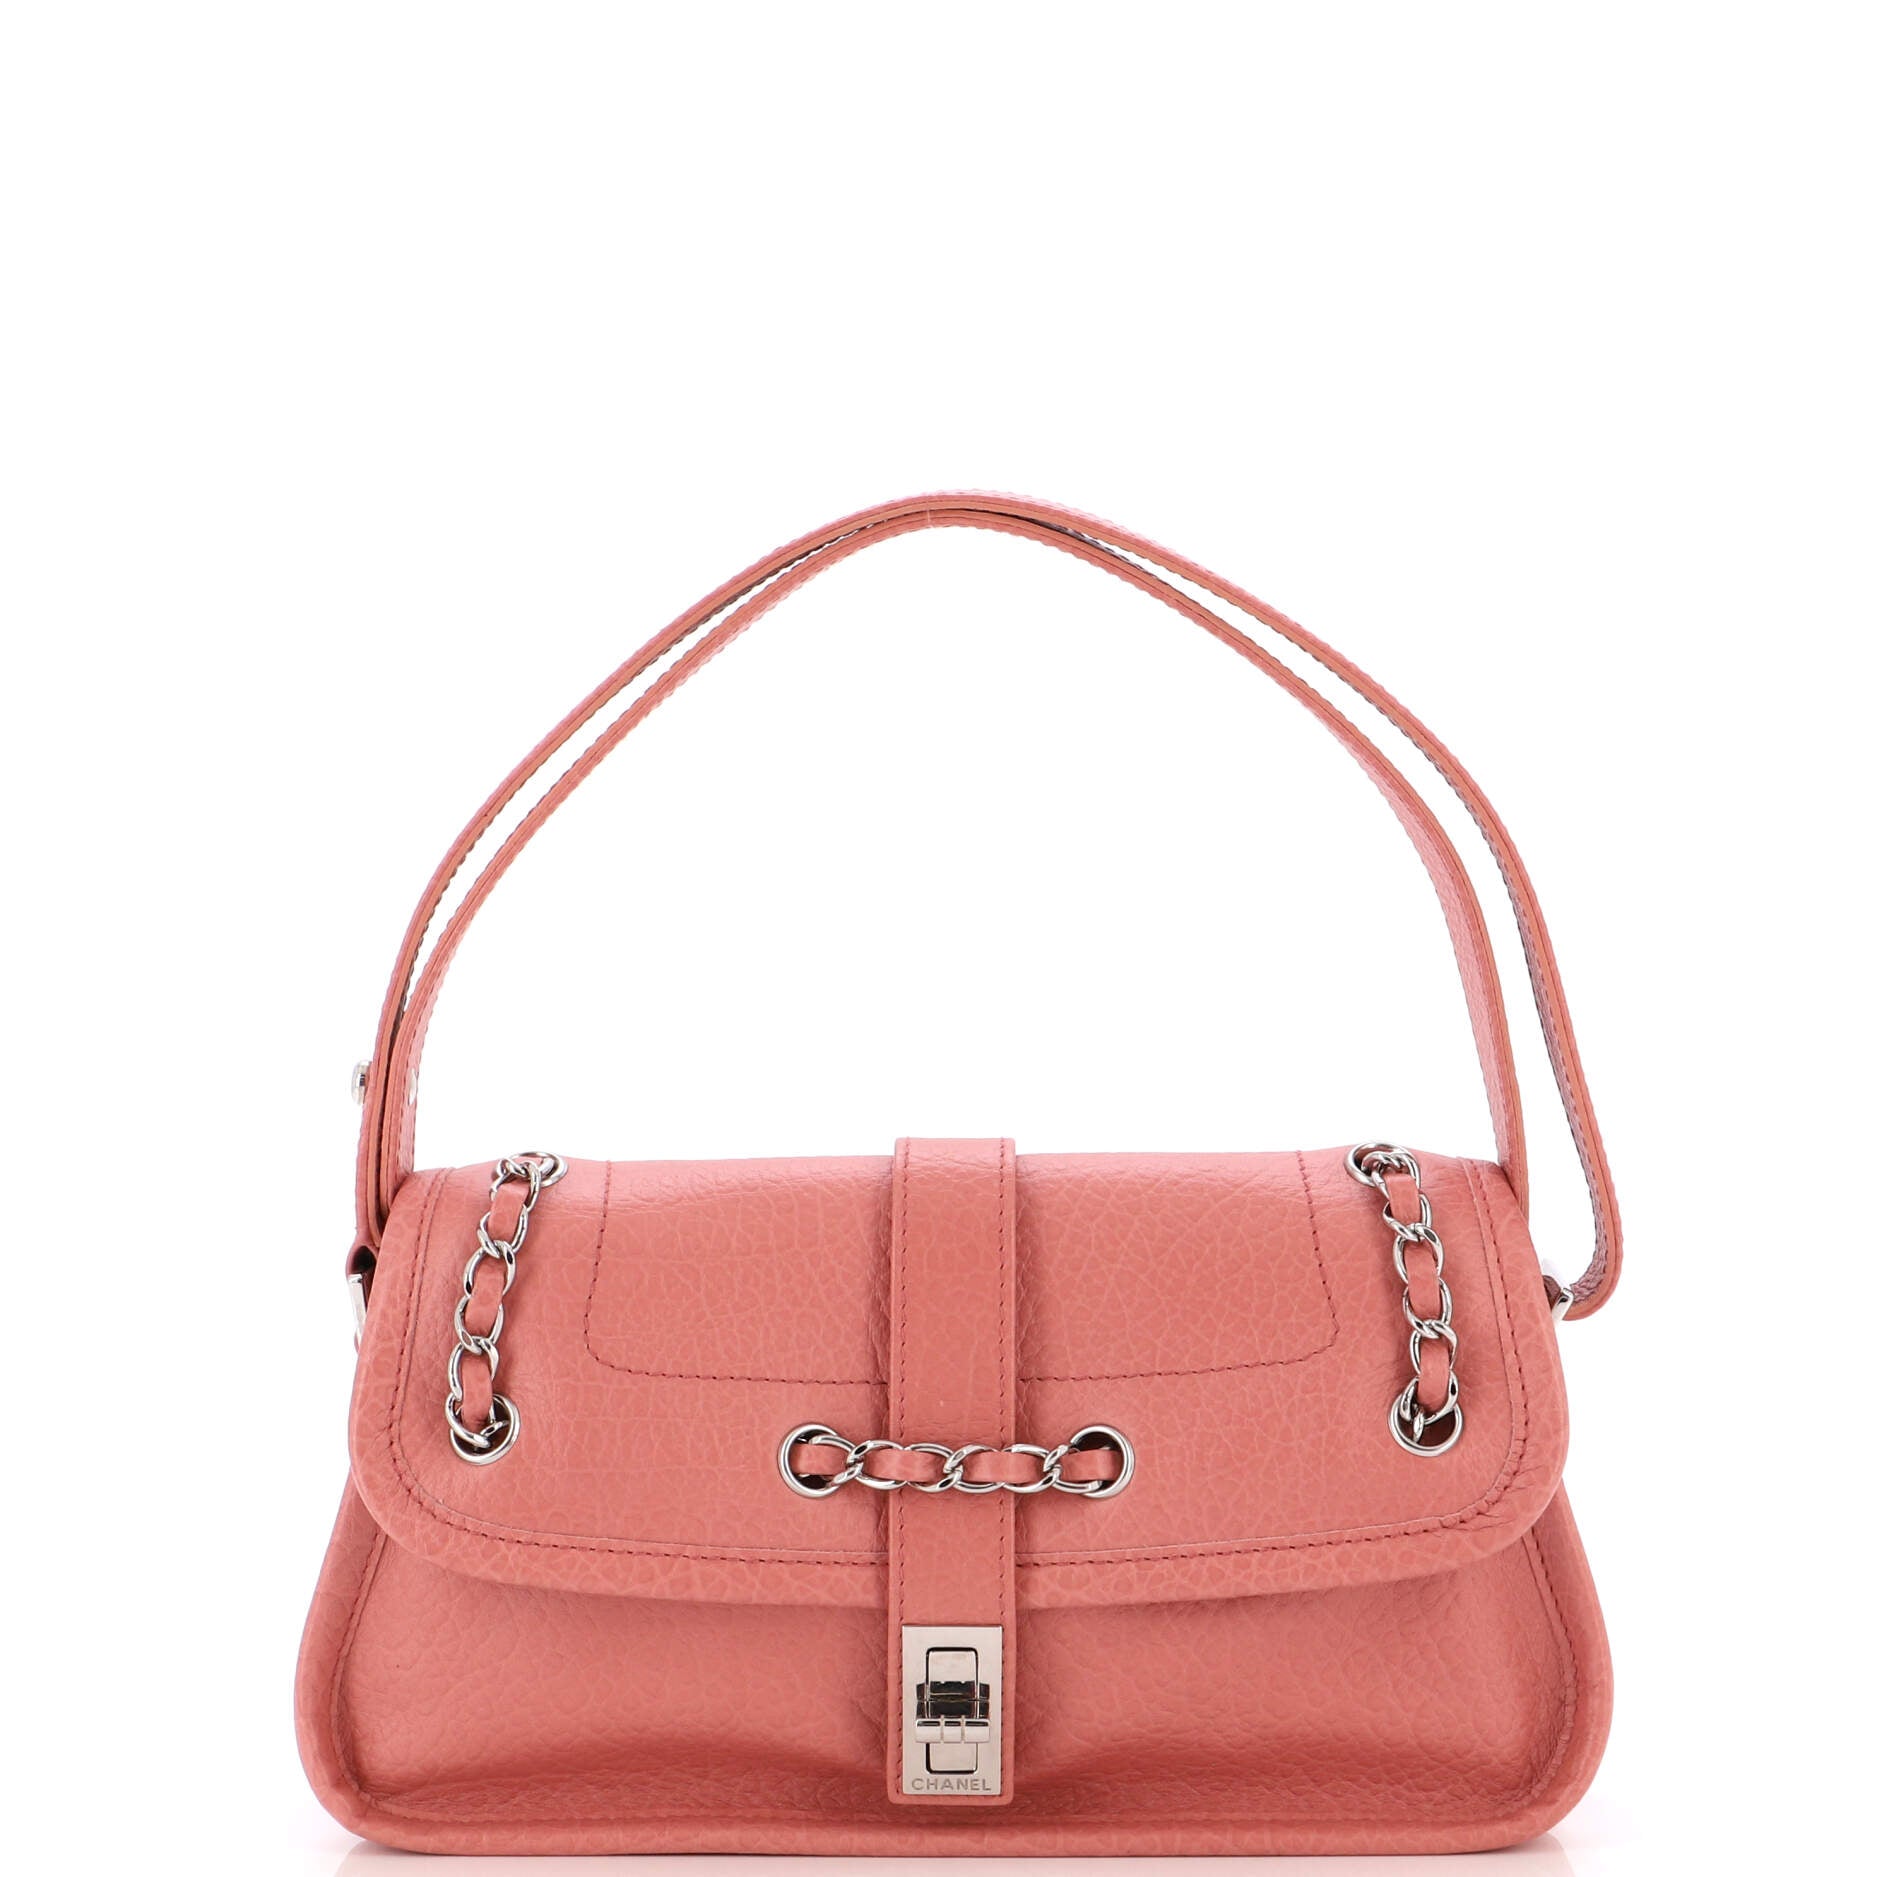 Chanel Vintage Mademoiselle Lock Flap Bag Leather Small Pink